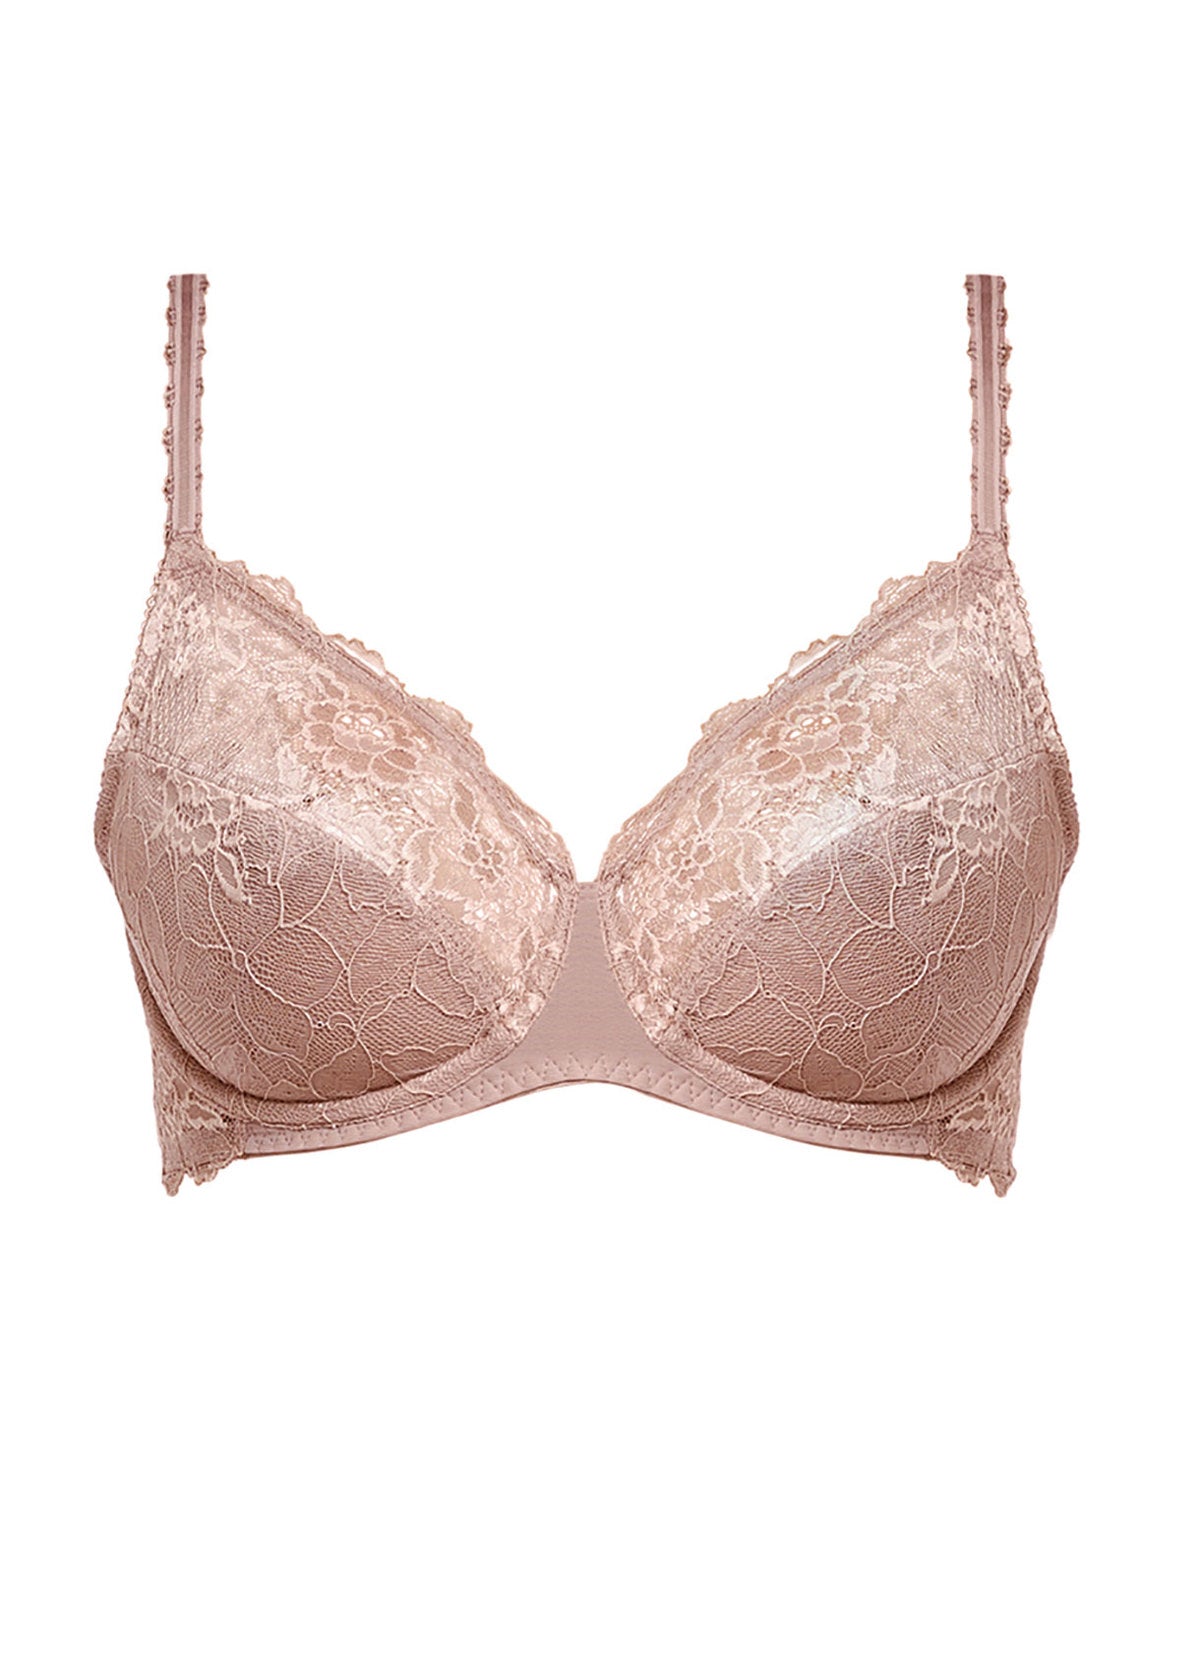 Wacoal Lace Perfection Moulded Push Up Bra: Rose Mist - Chantilly Online